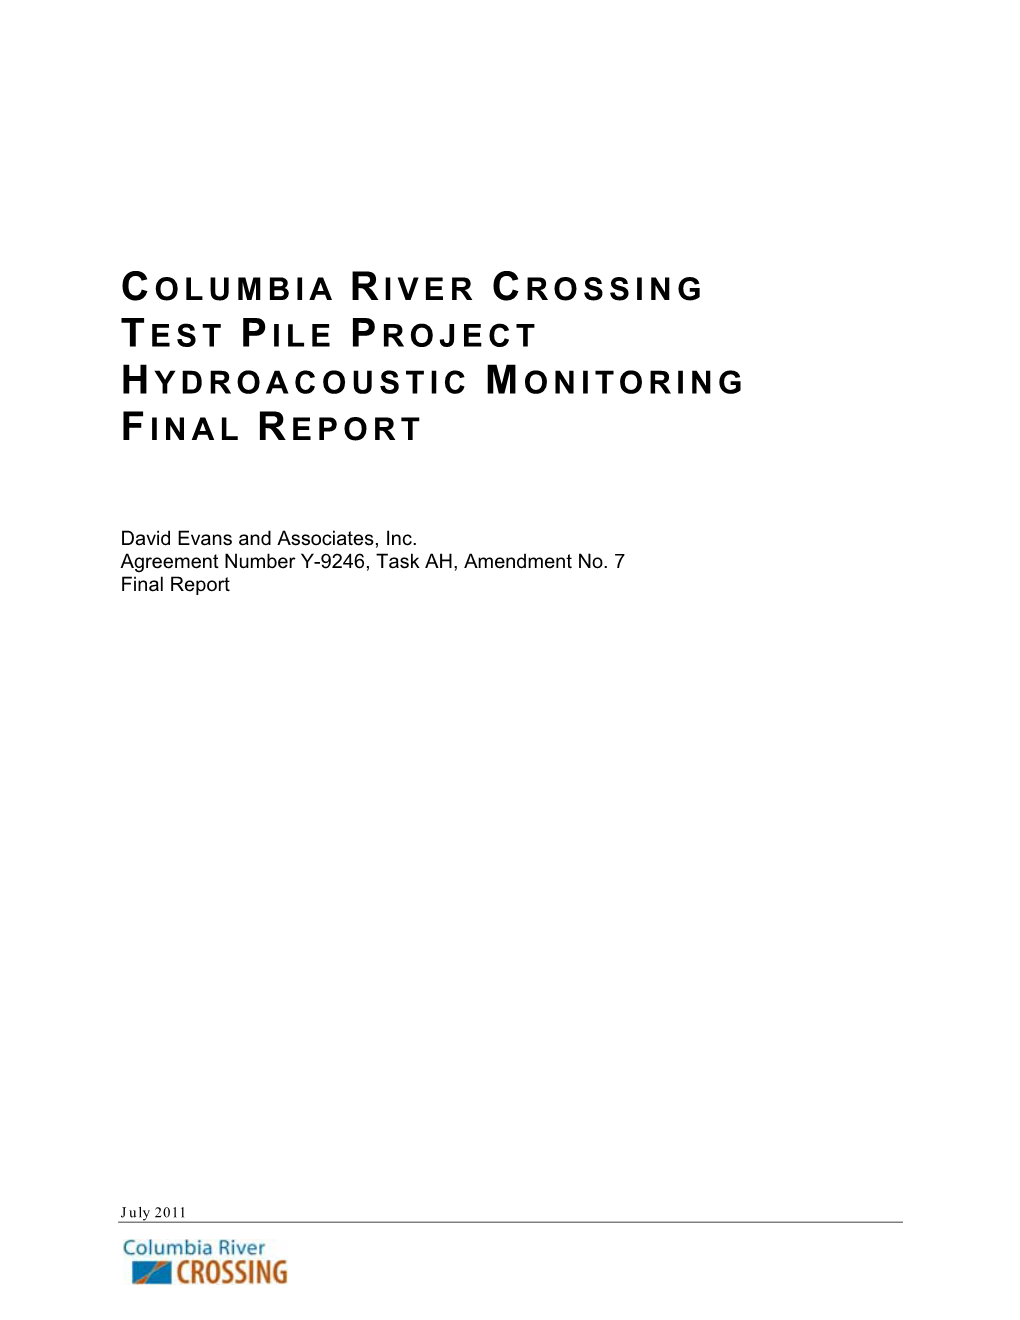 2011 Columbia Crossing Test Pile Hydroacoustic Monitoring Report